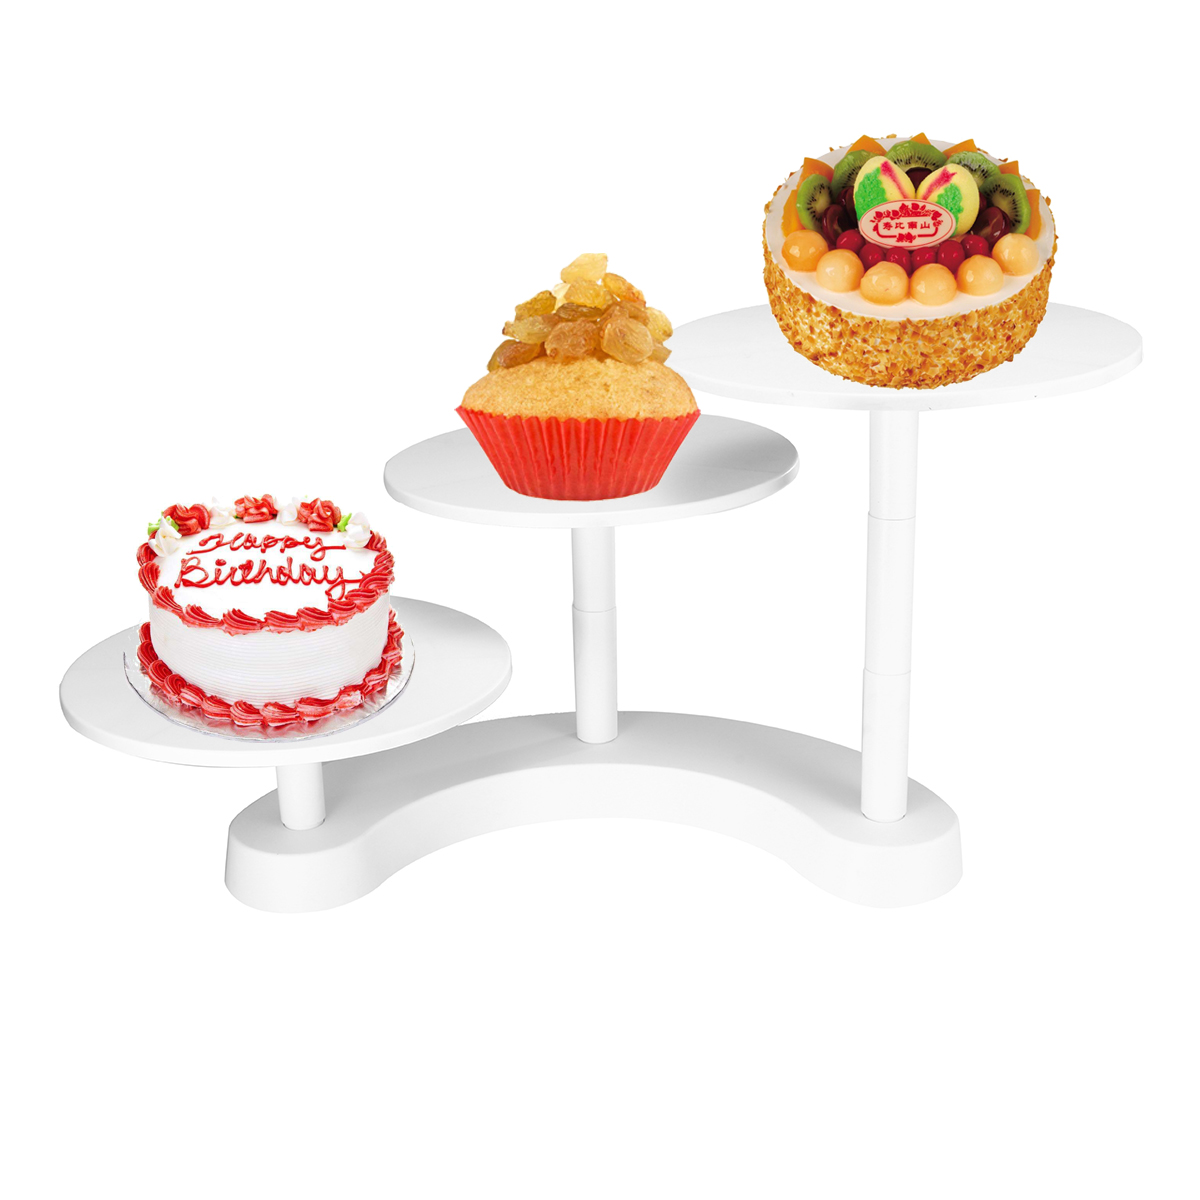 

White 3 Tiers Cake Stands Plastic Cupcake Dessert Wedding Birthday Party Display Decorations